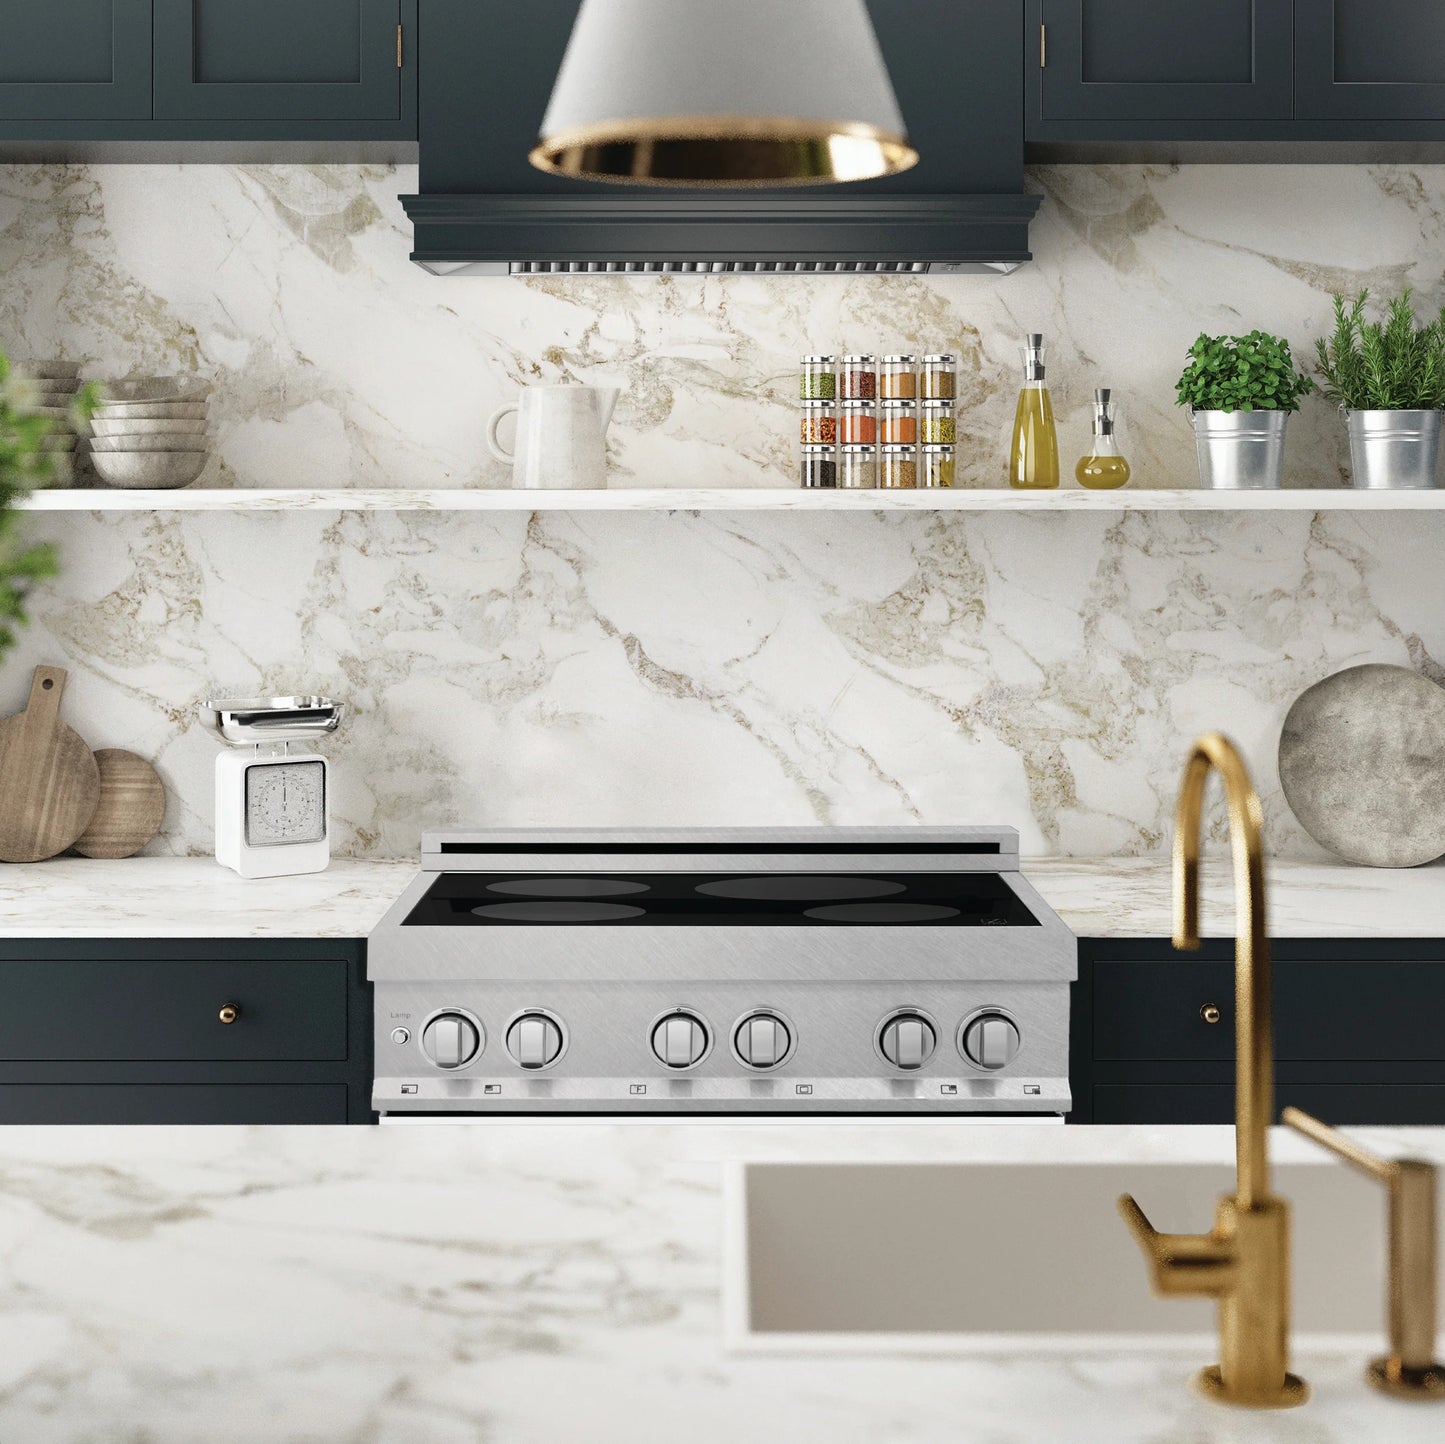 ZLINE 30 in. Induction Range in Fingerprint Resistant Stainless Steel with a 4 Element Stove, Electric Oven, and White Matte Door (RAINDS-WM-30)